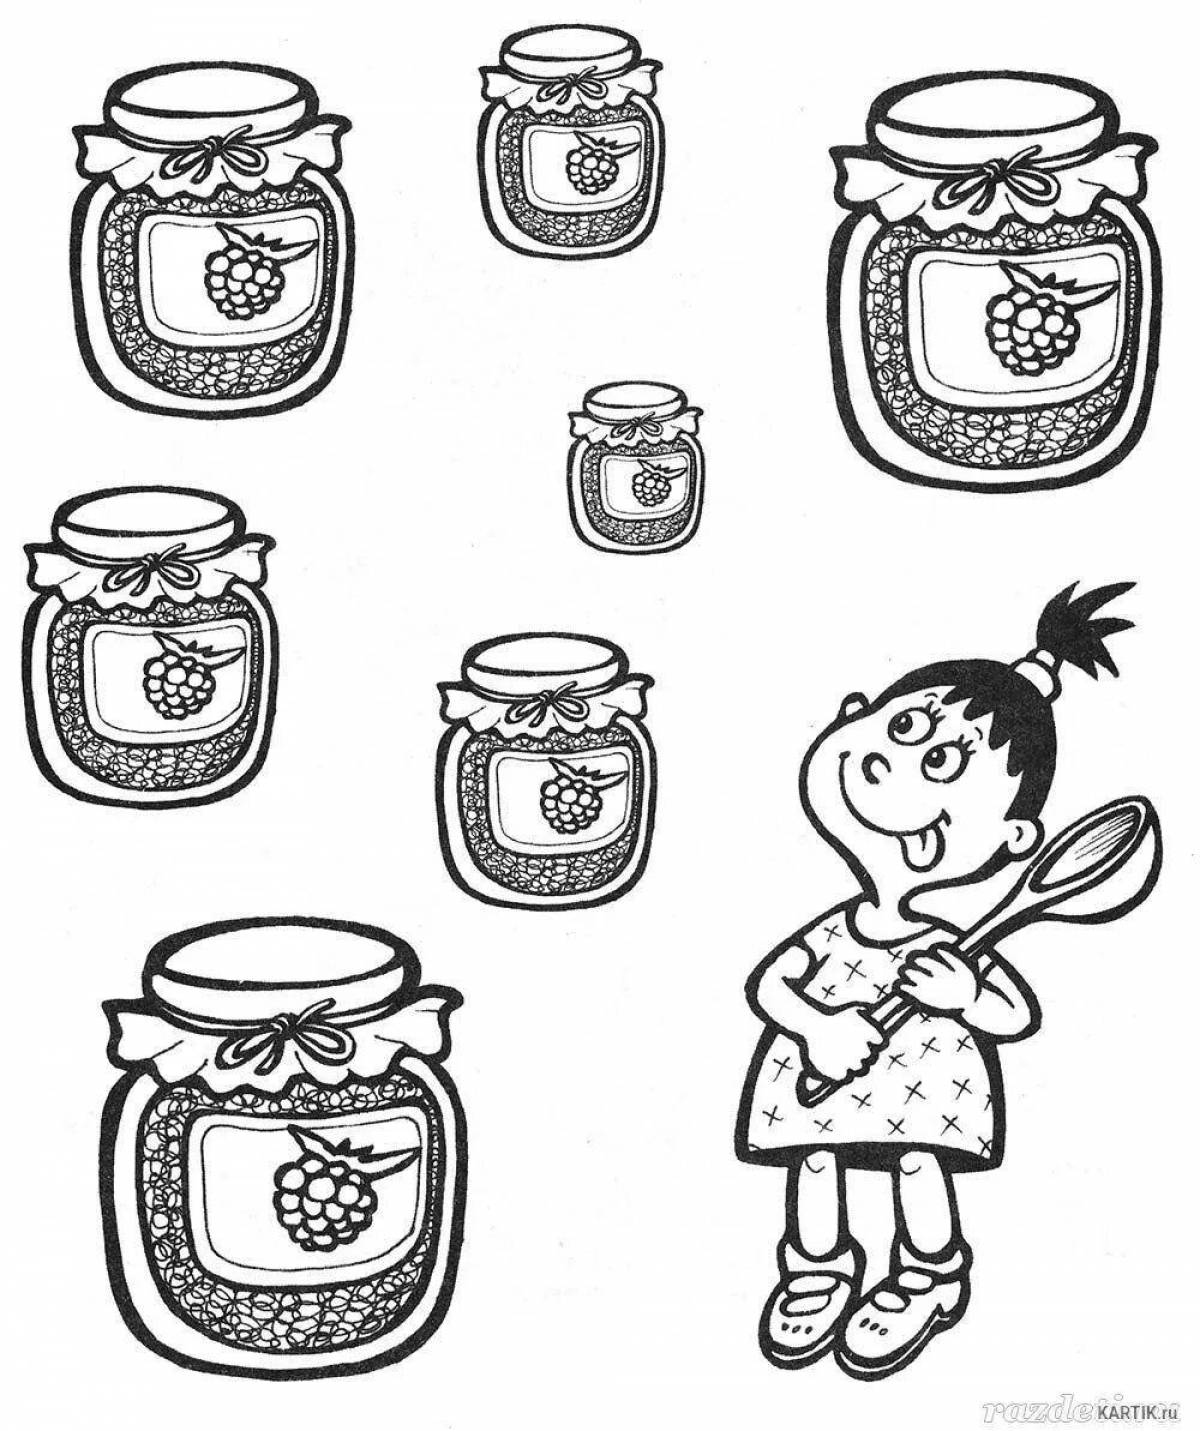 Adorable jam coloring book for kids